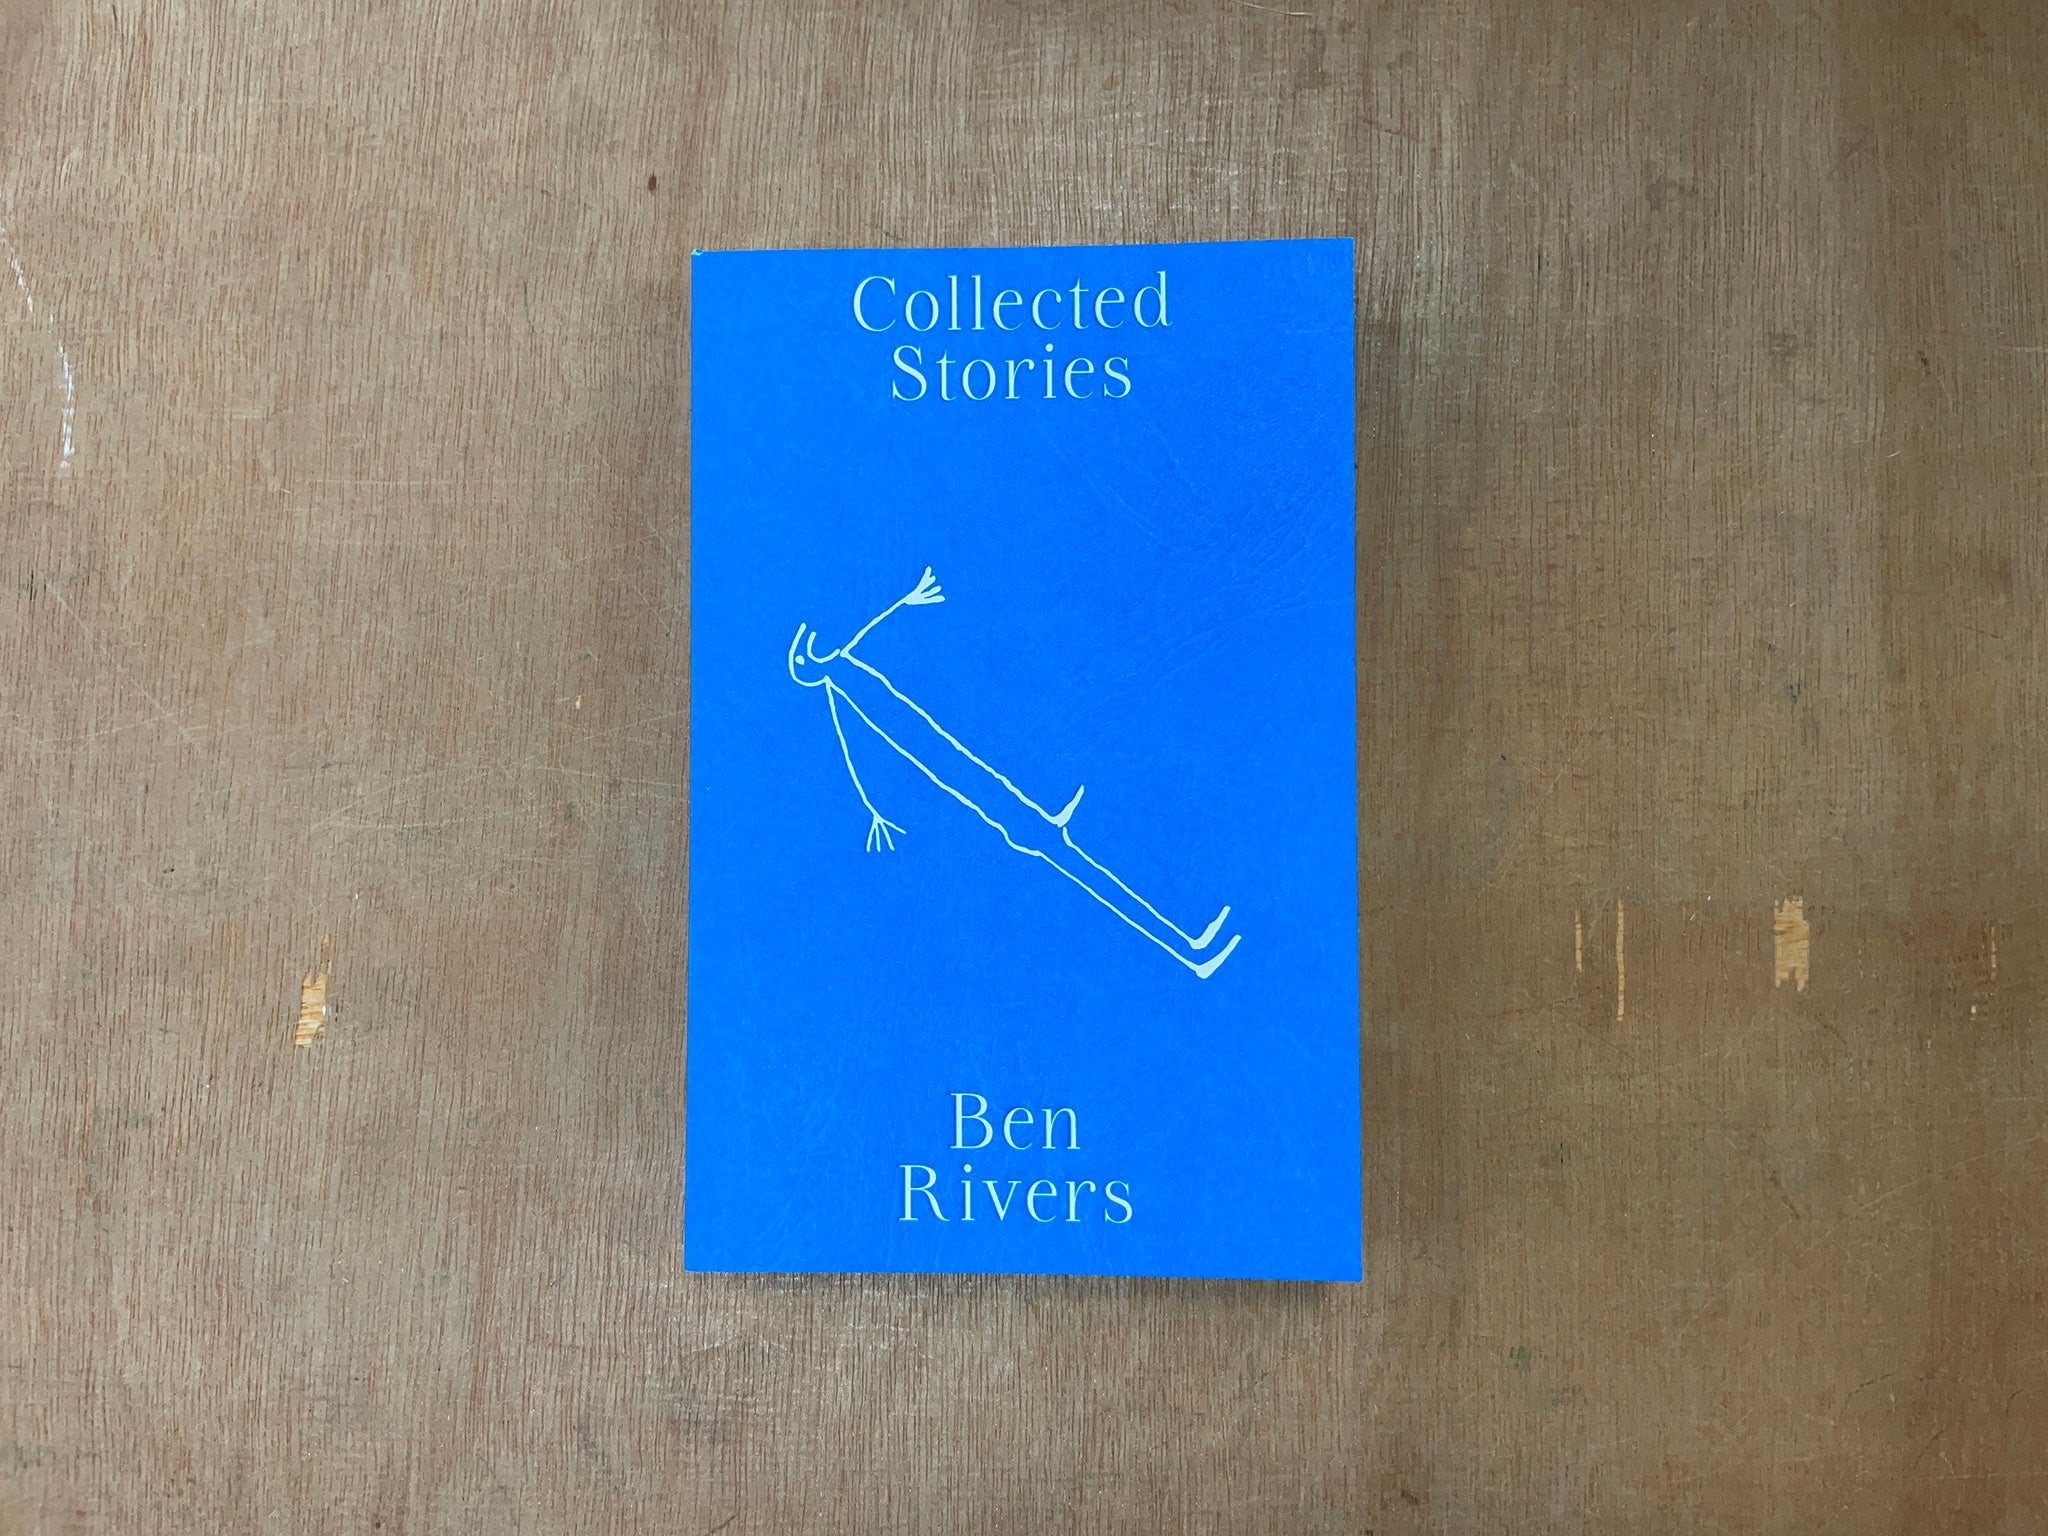 COLLECTED STORIES by Ben Rivers